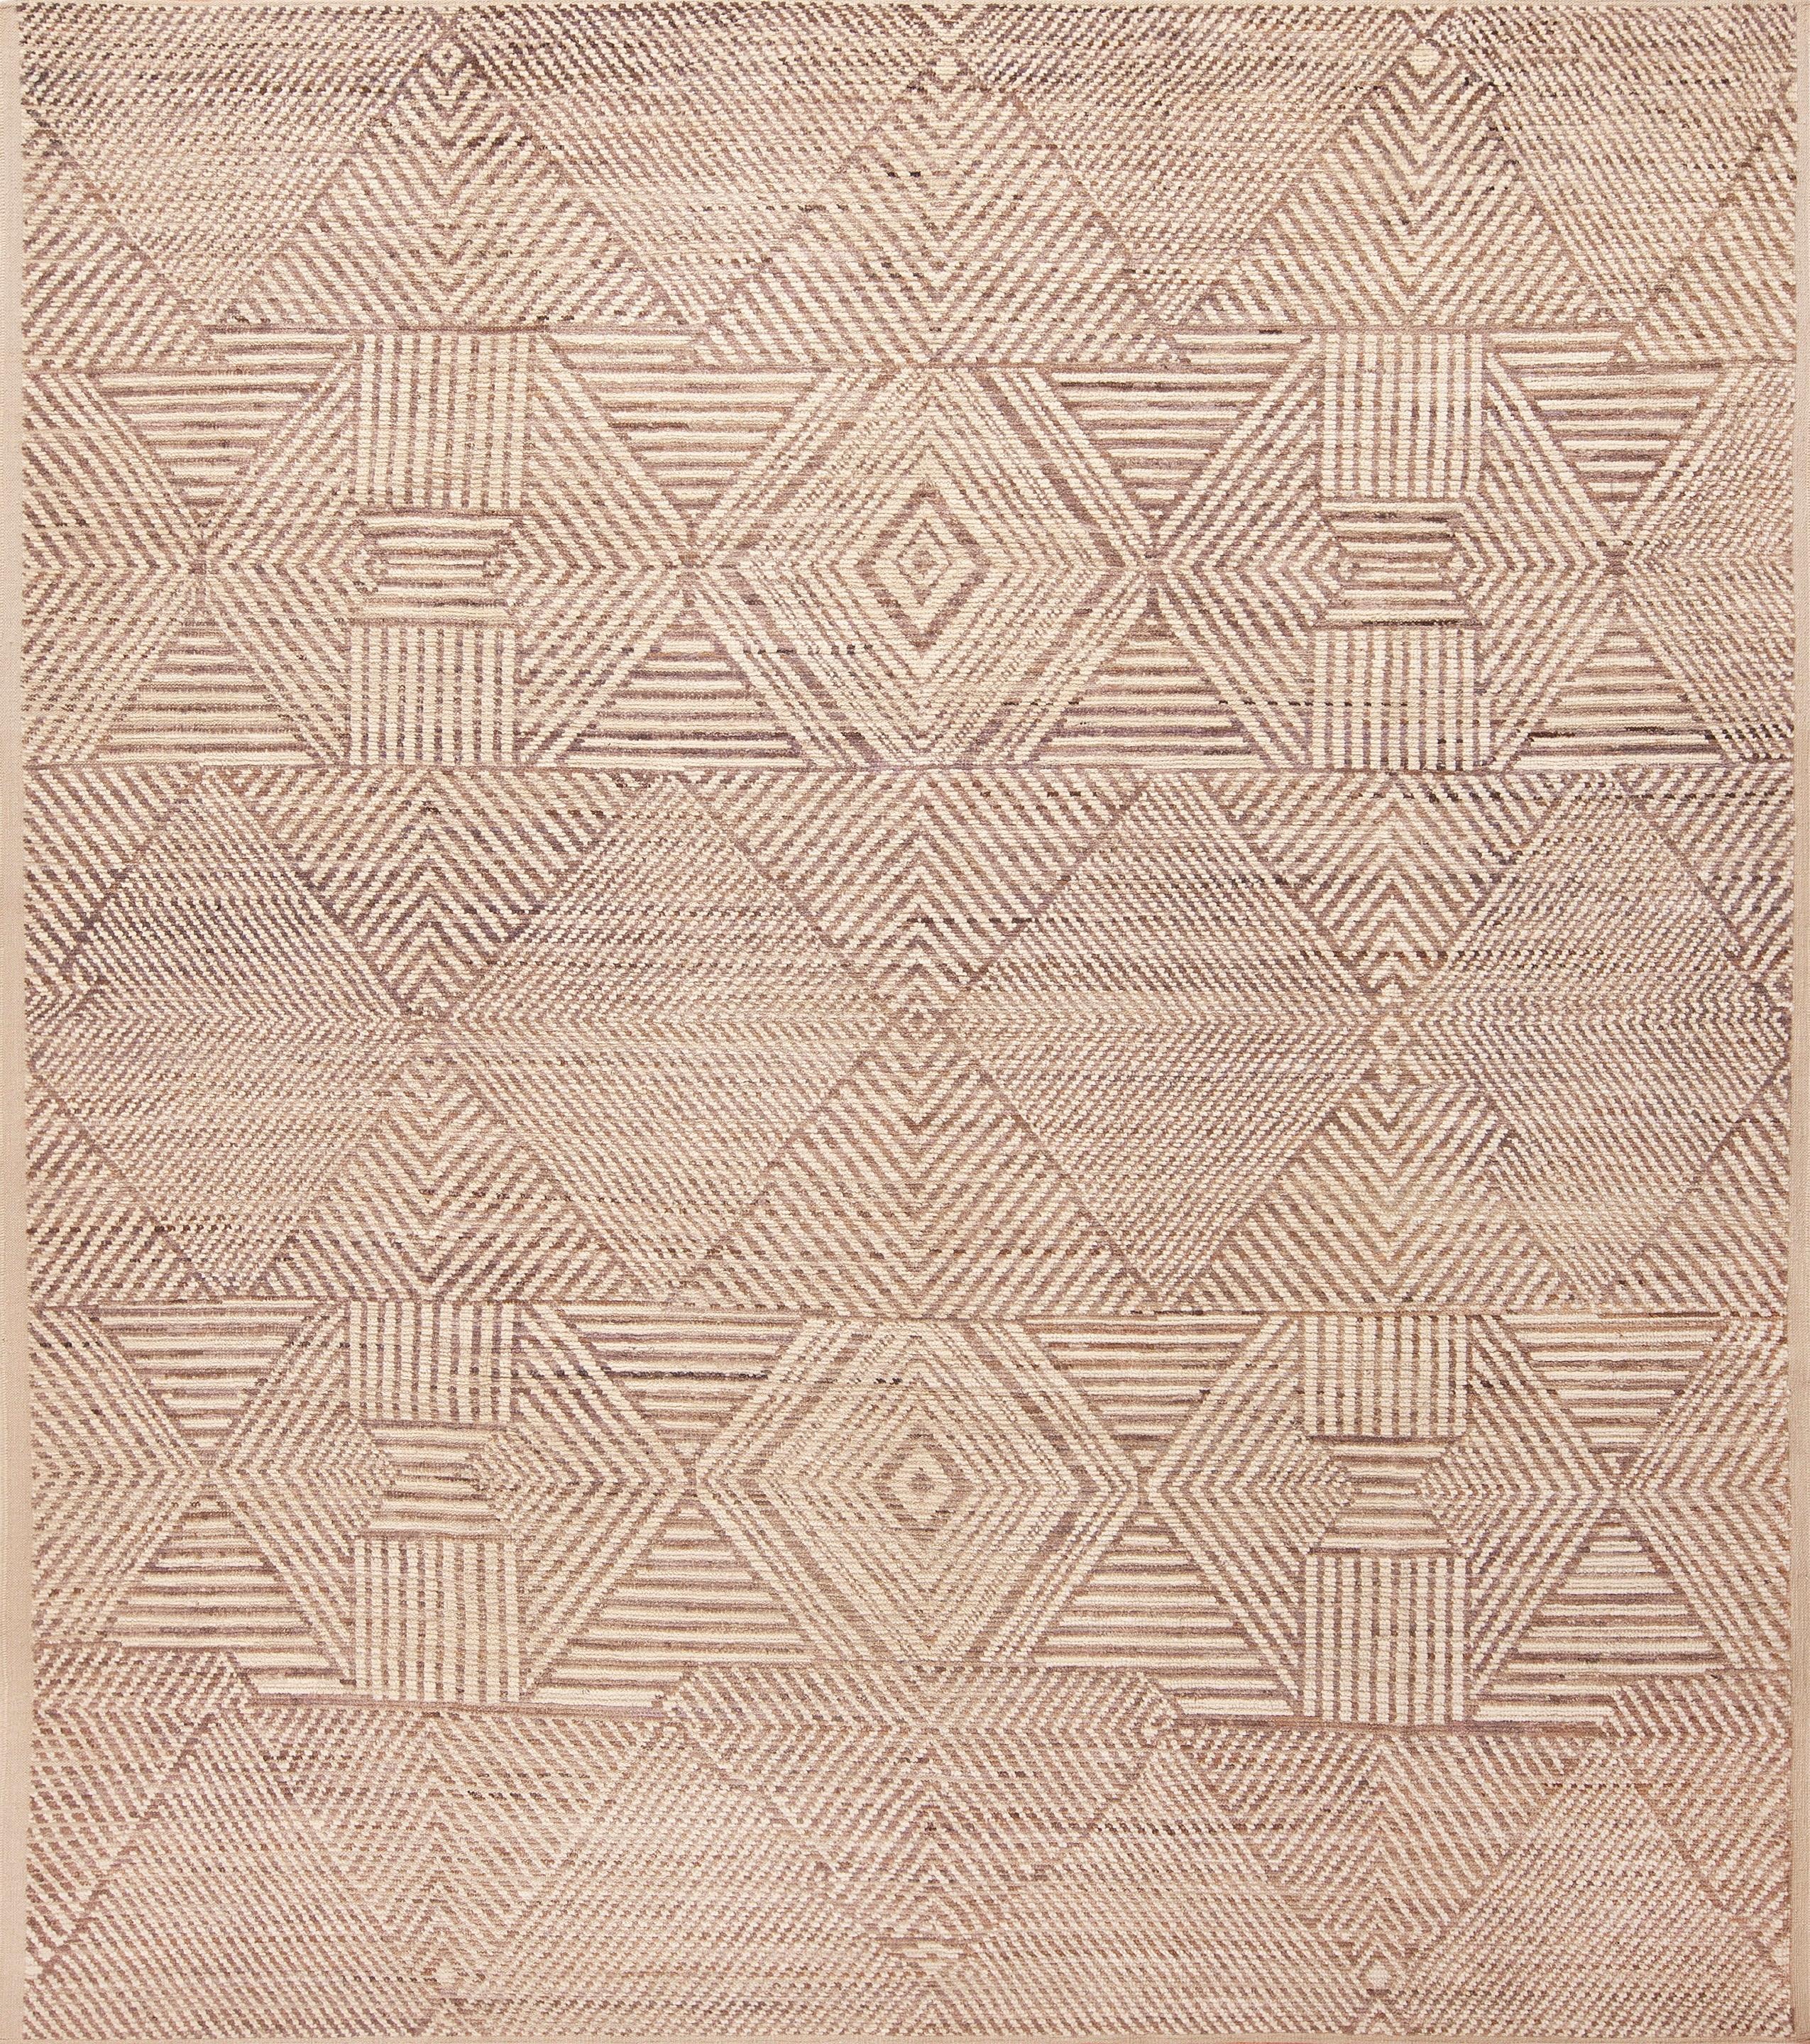 Tribal Nazmiyal Collection North African Inspired Modern Geometric Neutral Rug 9' x 10' For Sale